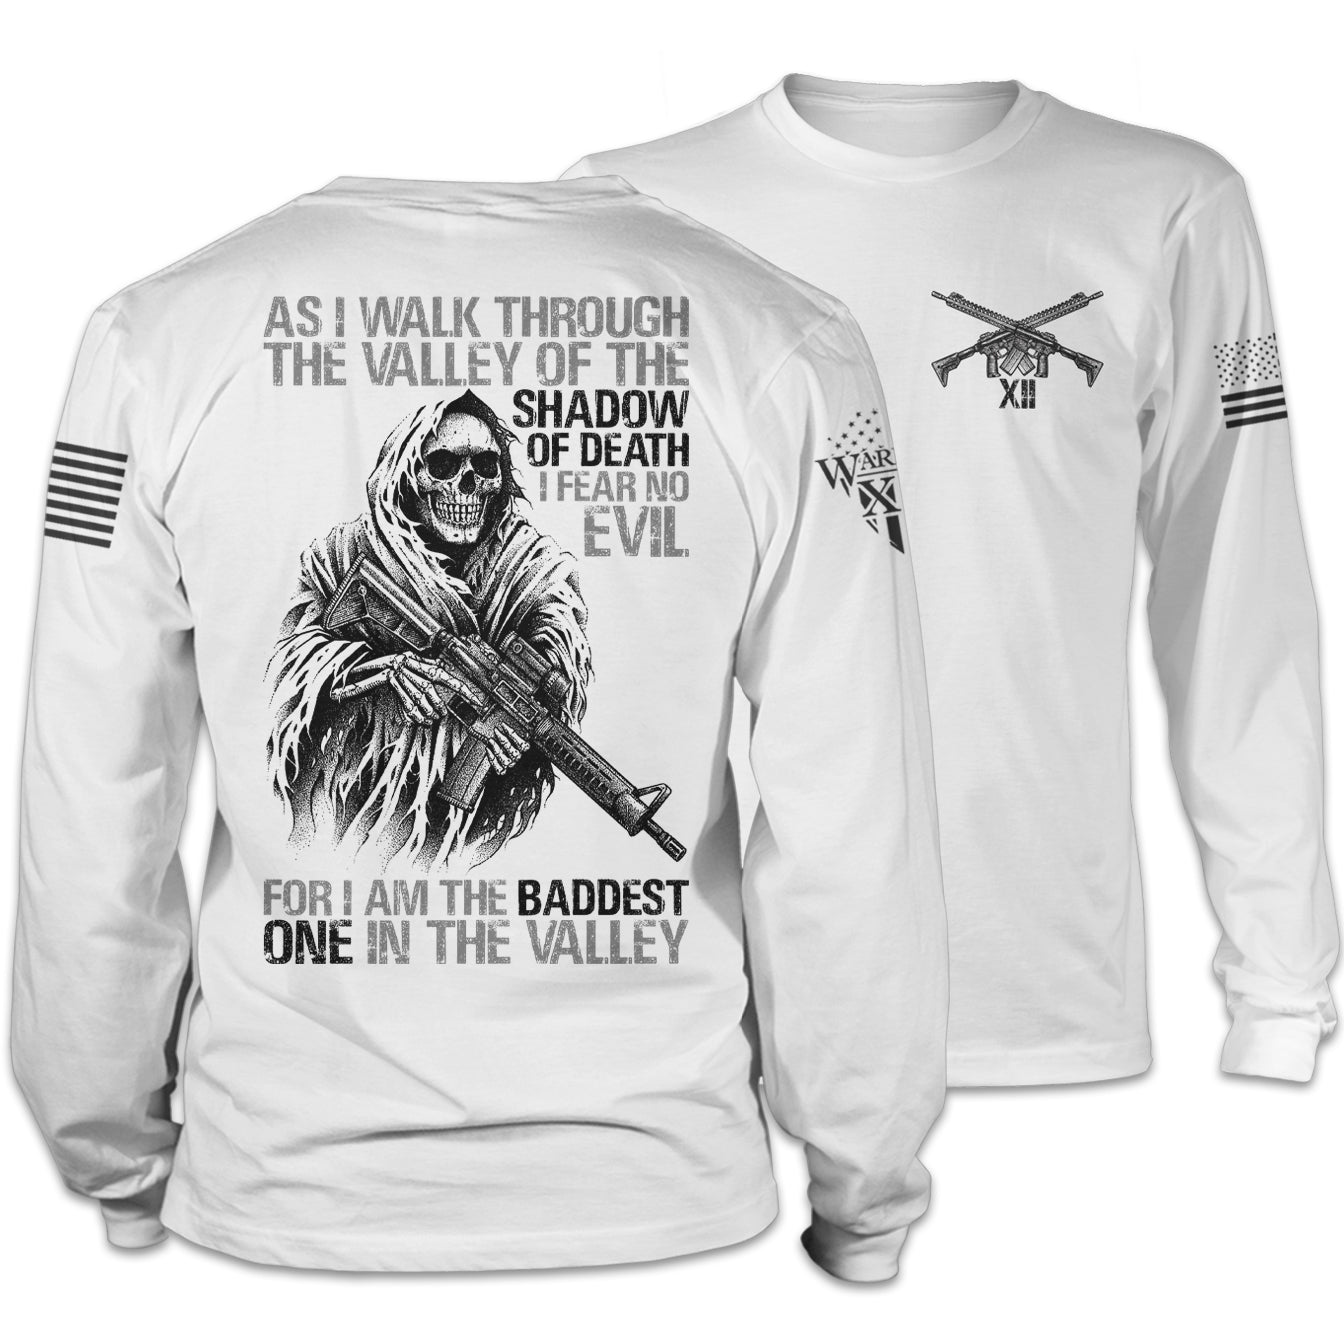 Front and back white Baddest In The Valley long sleeve shirt with the words" As I walk through the valley of the shadow of death, I fear no evil, for I am the baddest one in the valley".